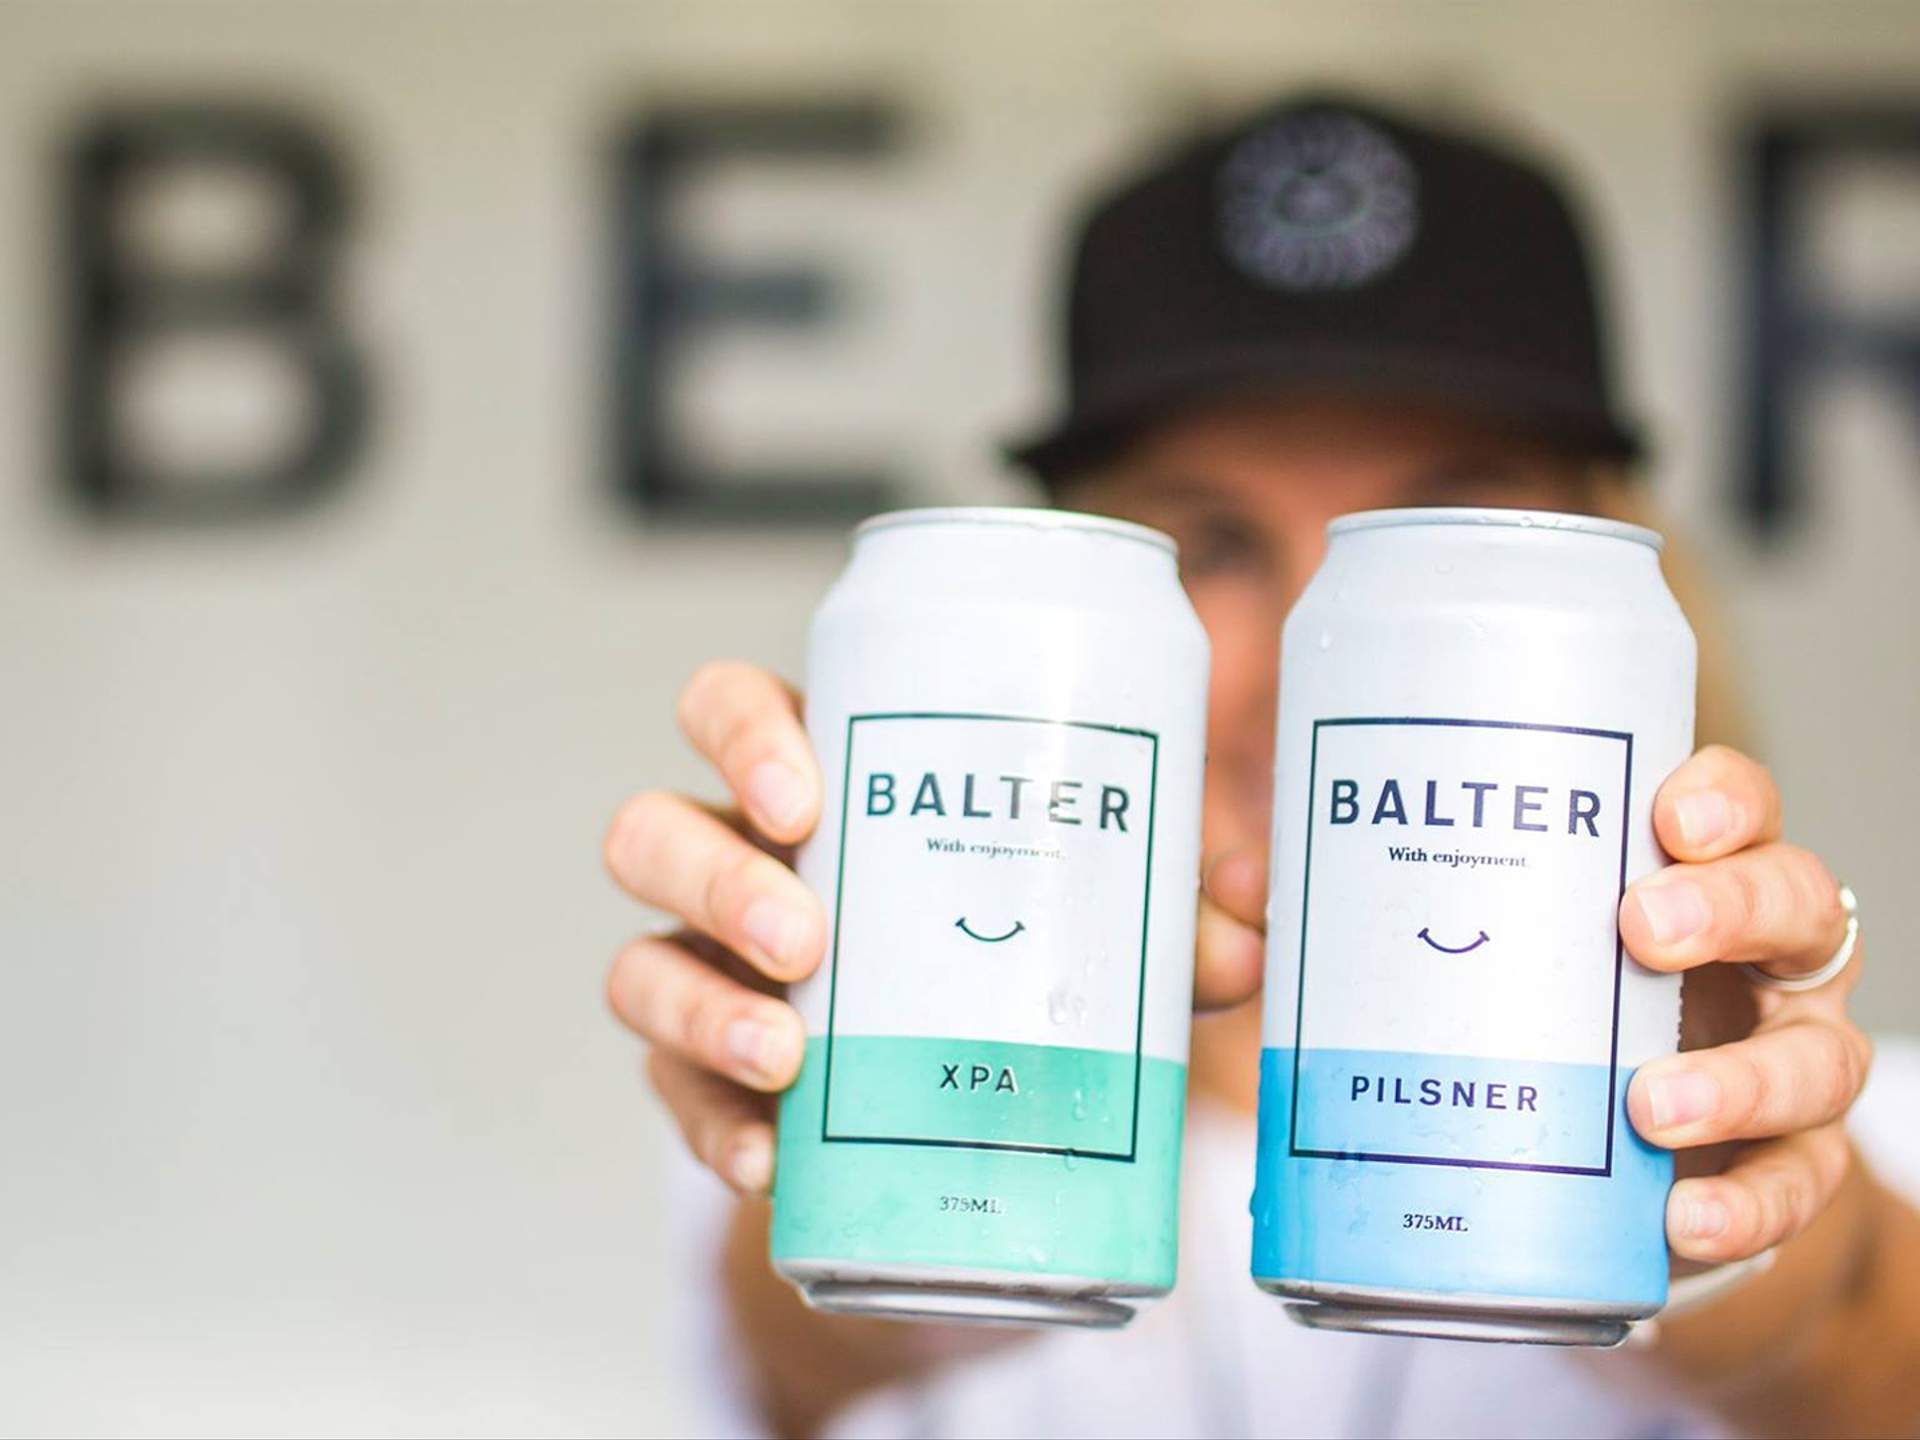 Award-Winning Balter Brewing Company Has Been Snapped Up by Beer Behemoth CUB - Concrete Playground